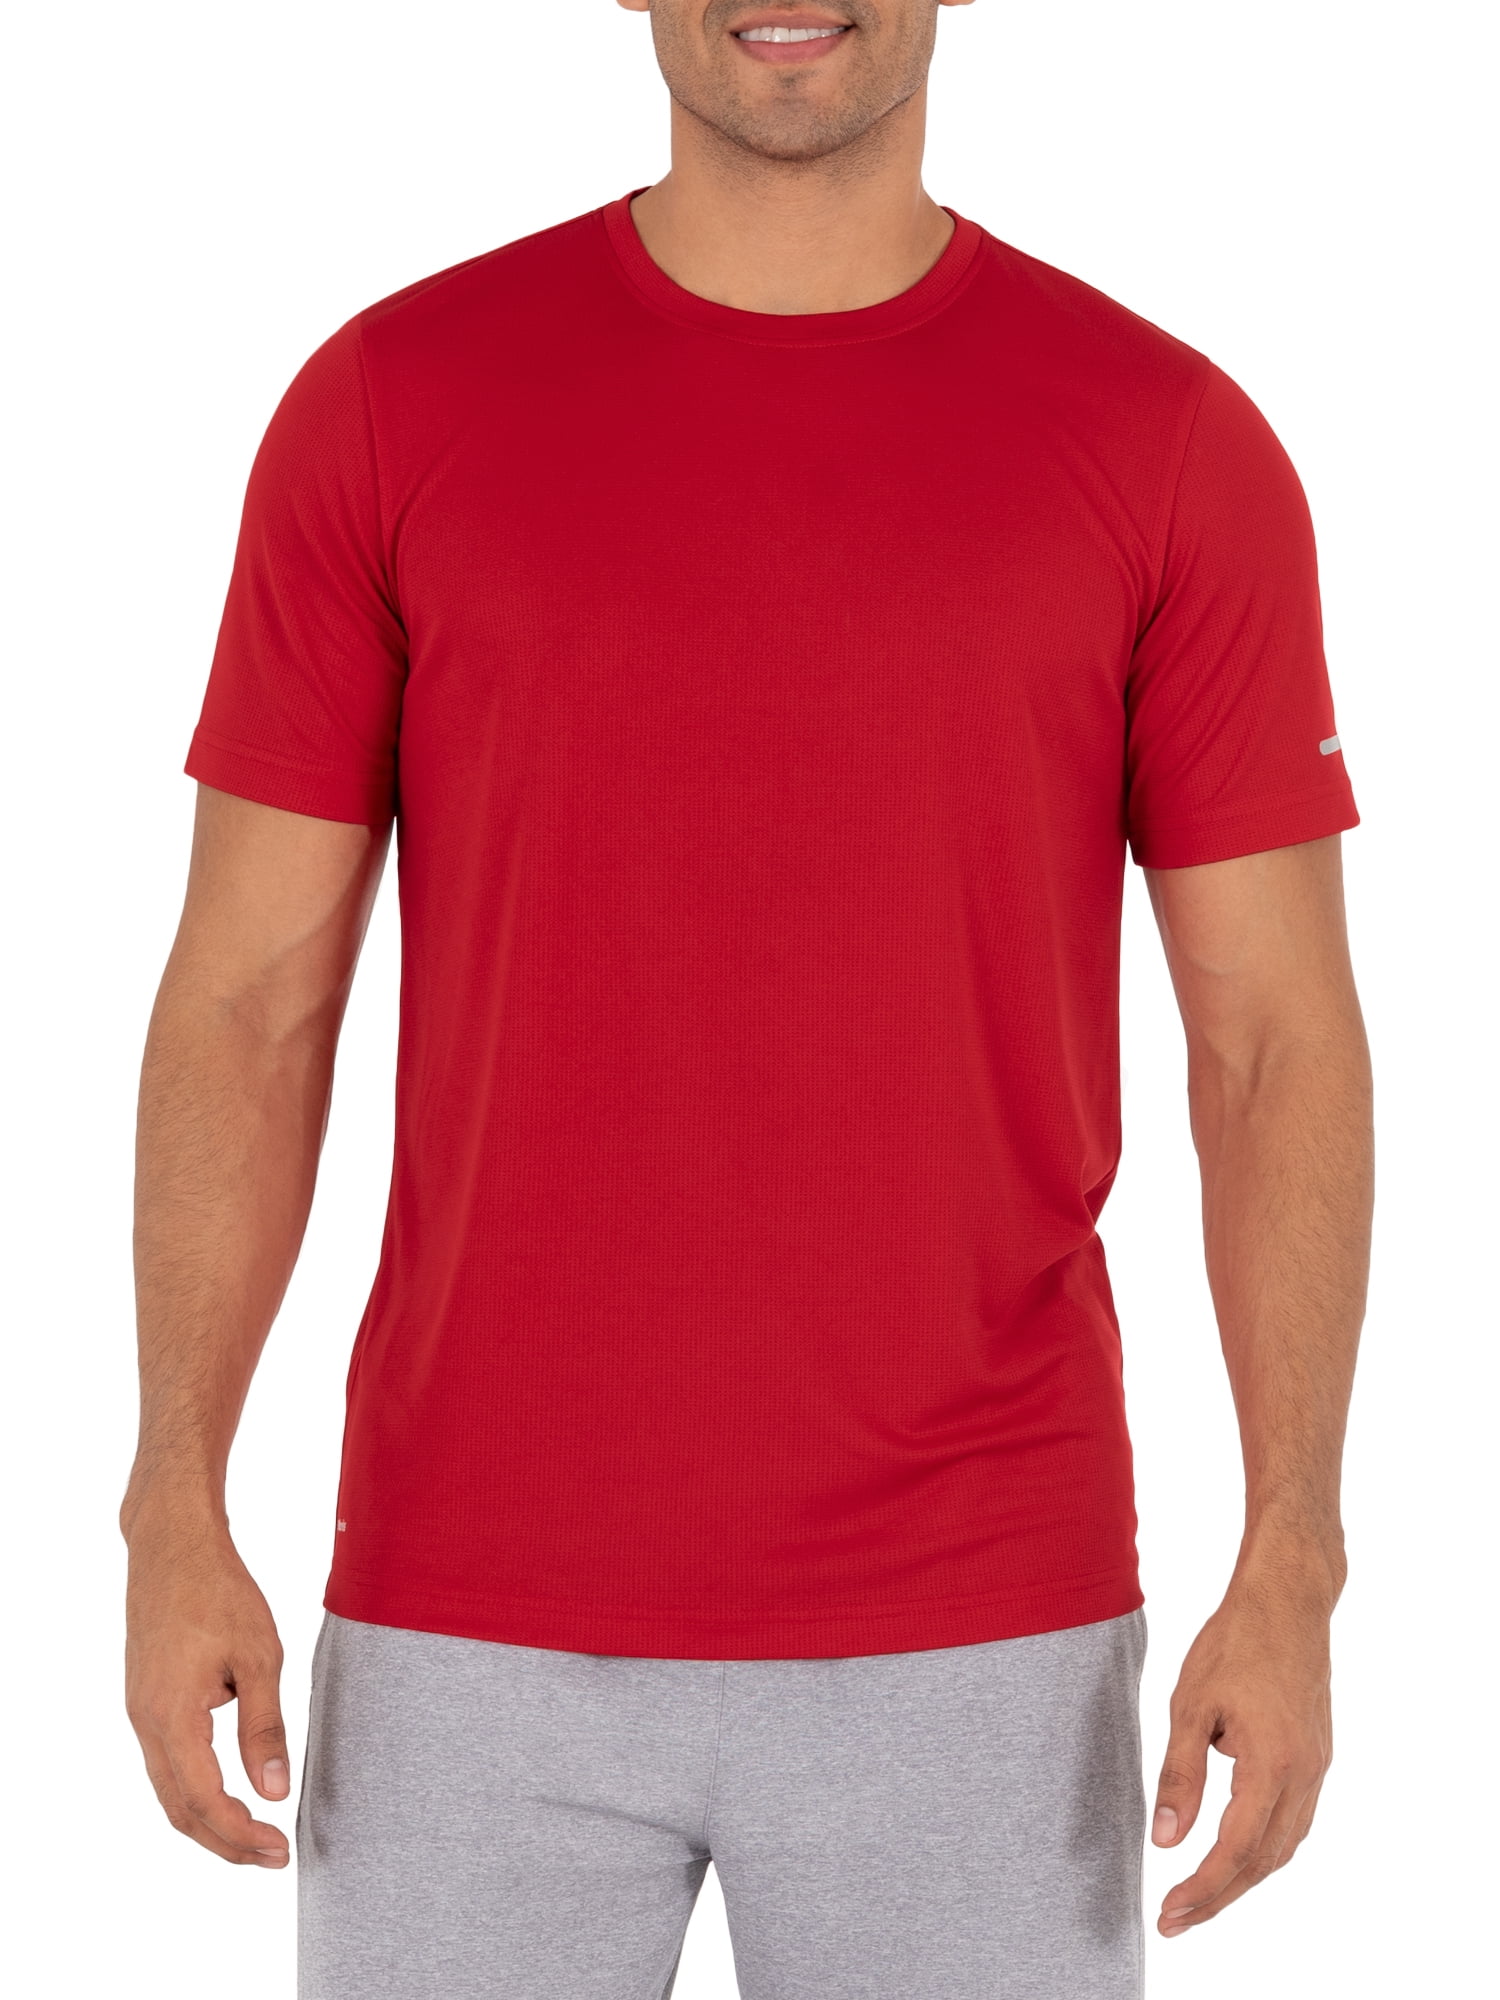 Athletic Works Men's and Big Men's Core Quick Dry Short Sleeve T-Shirt, up  to Size 5XL 